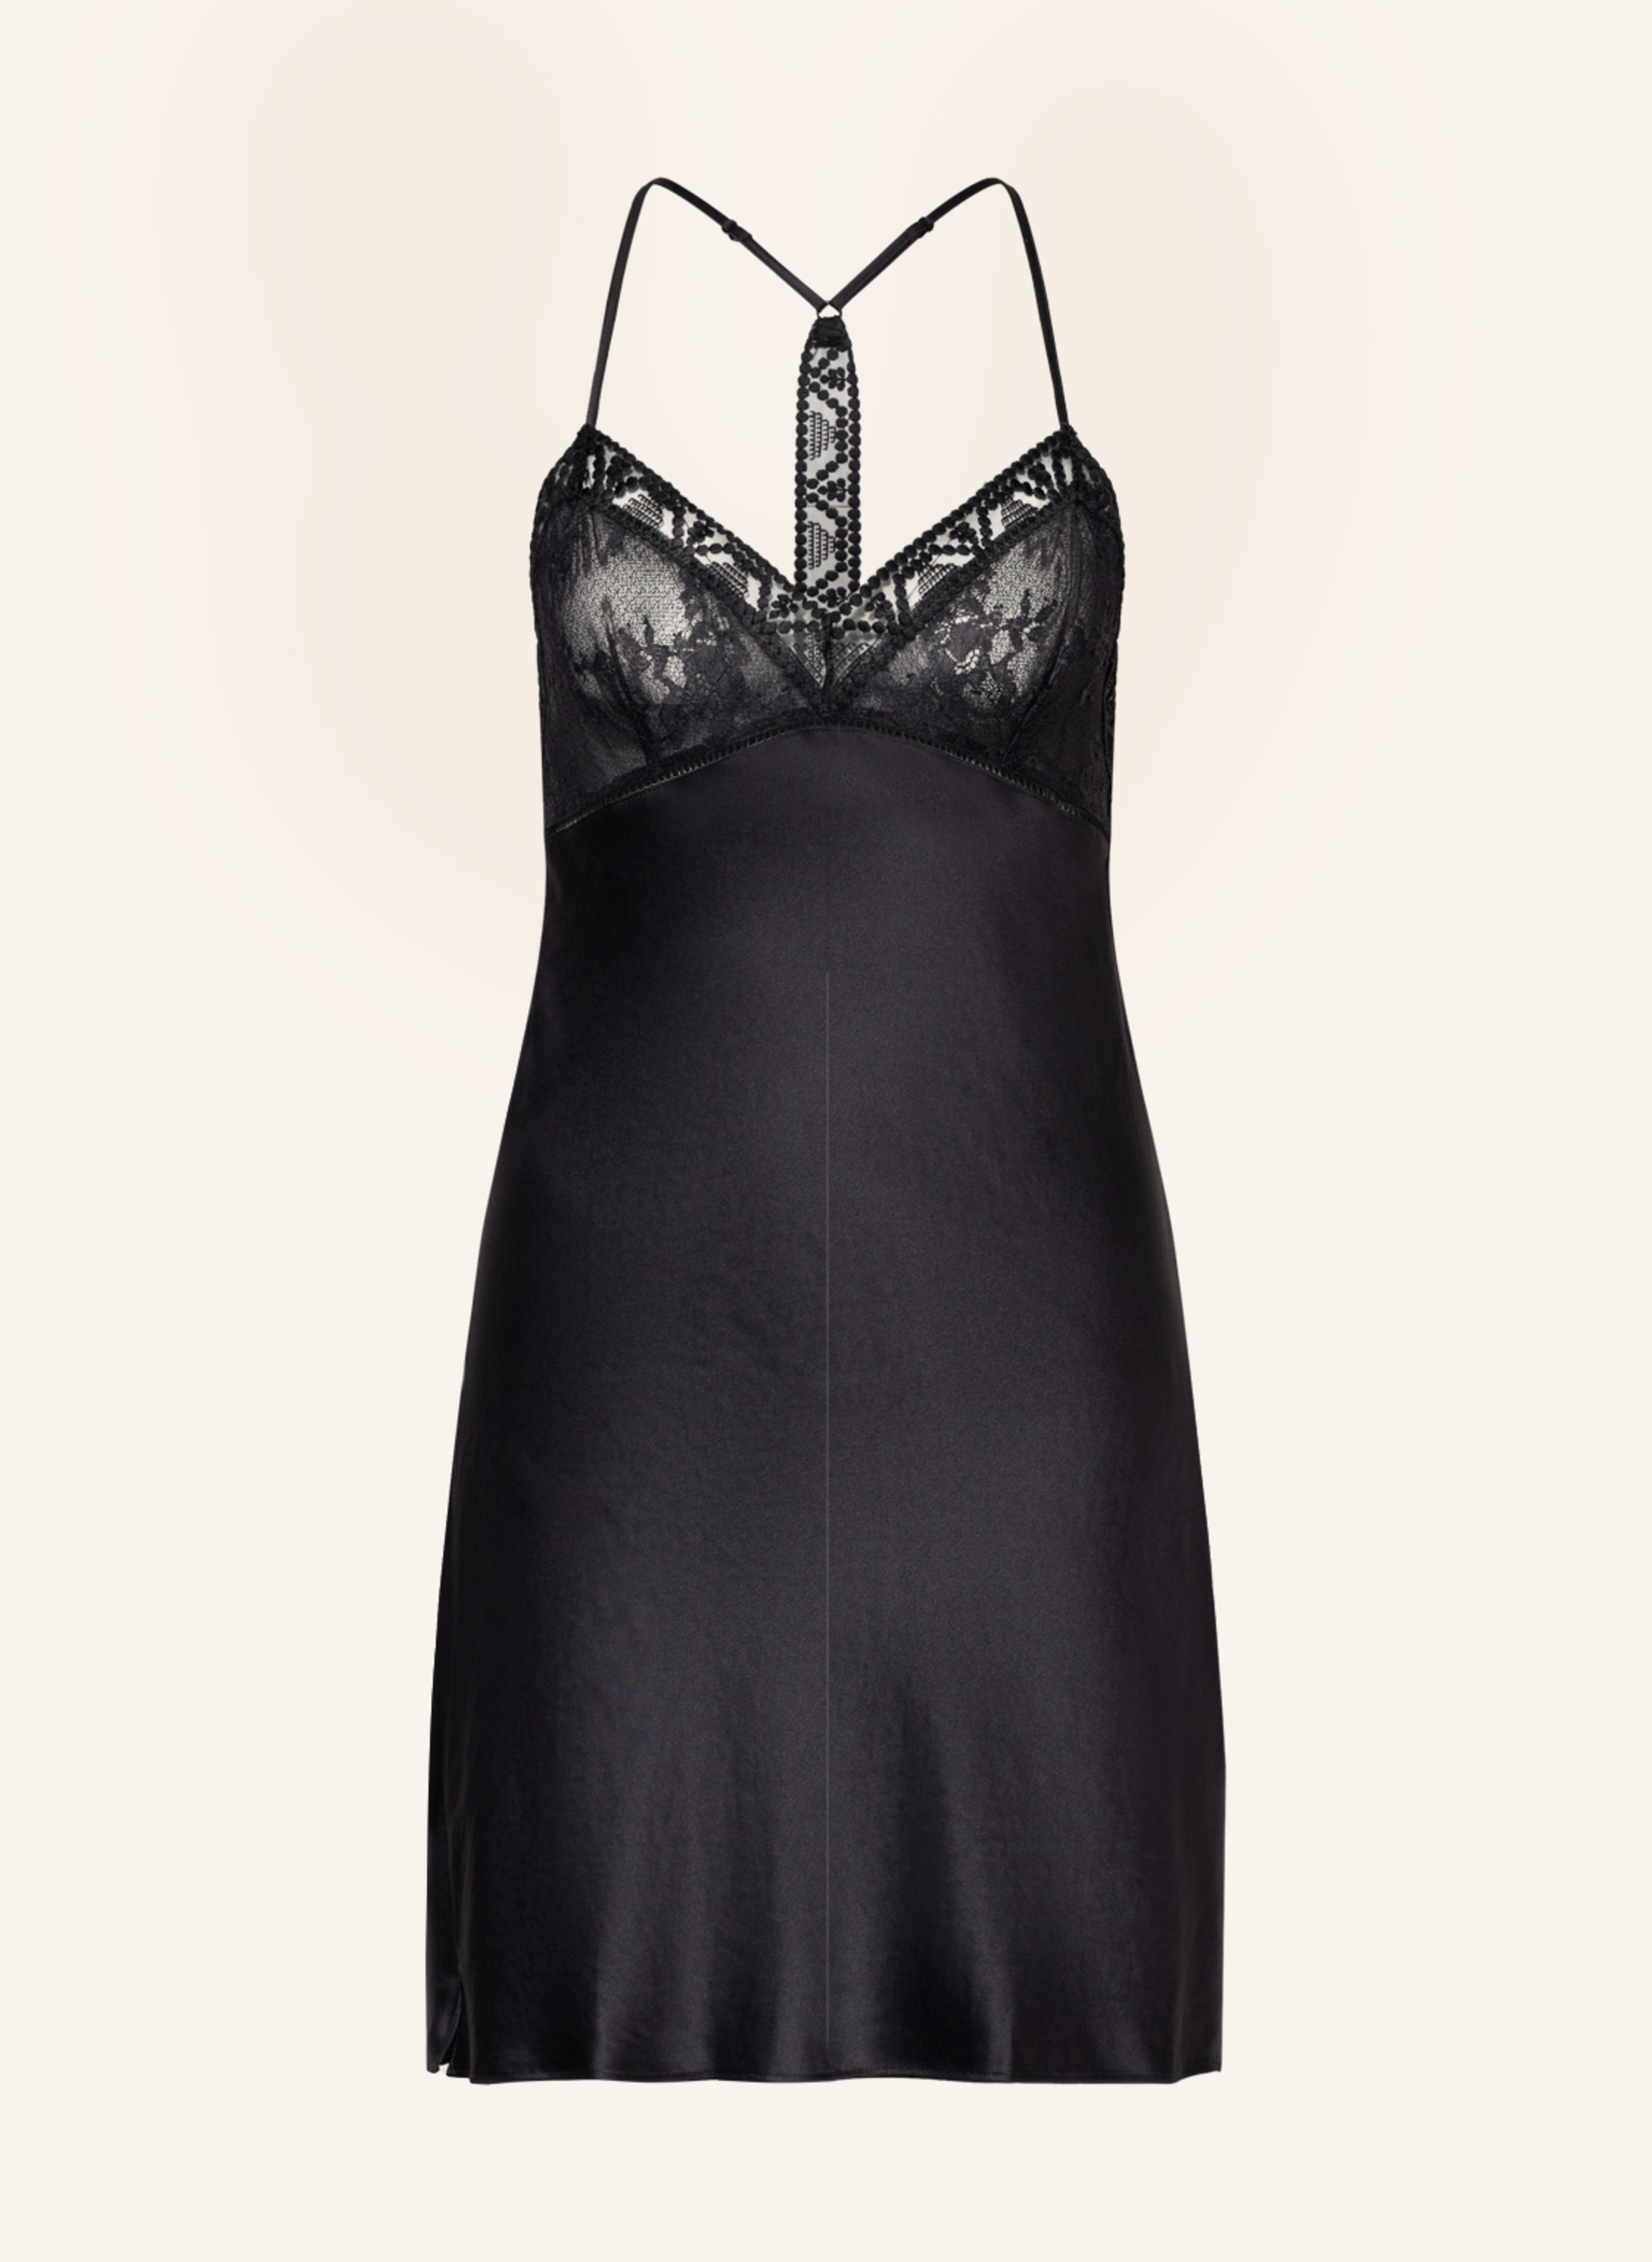 Passionata Negligee OLIVIA made of satin in black - Buy Online ...